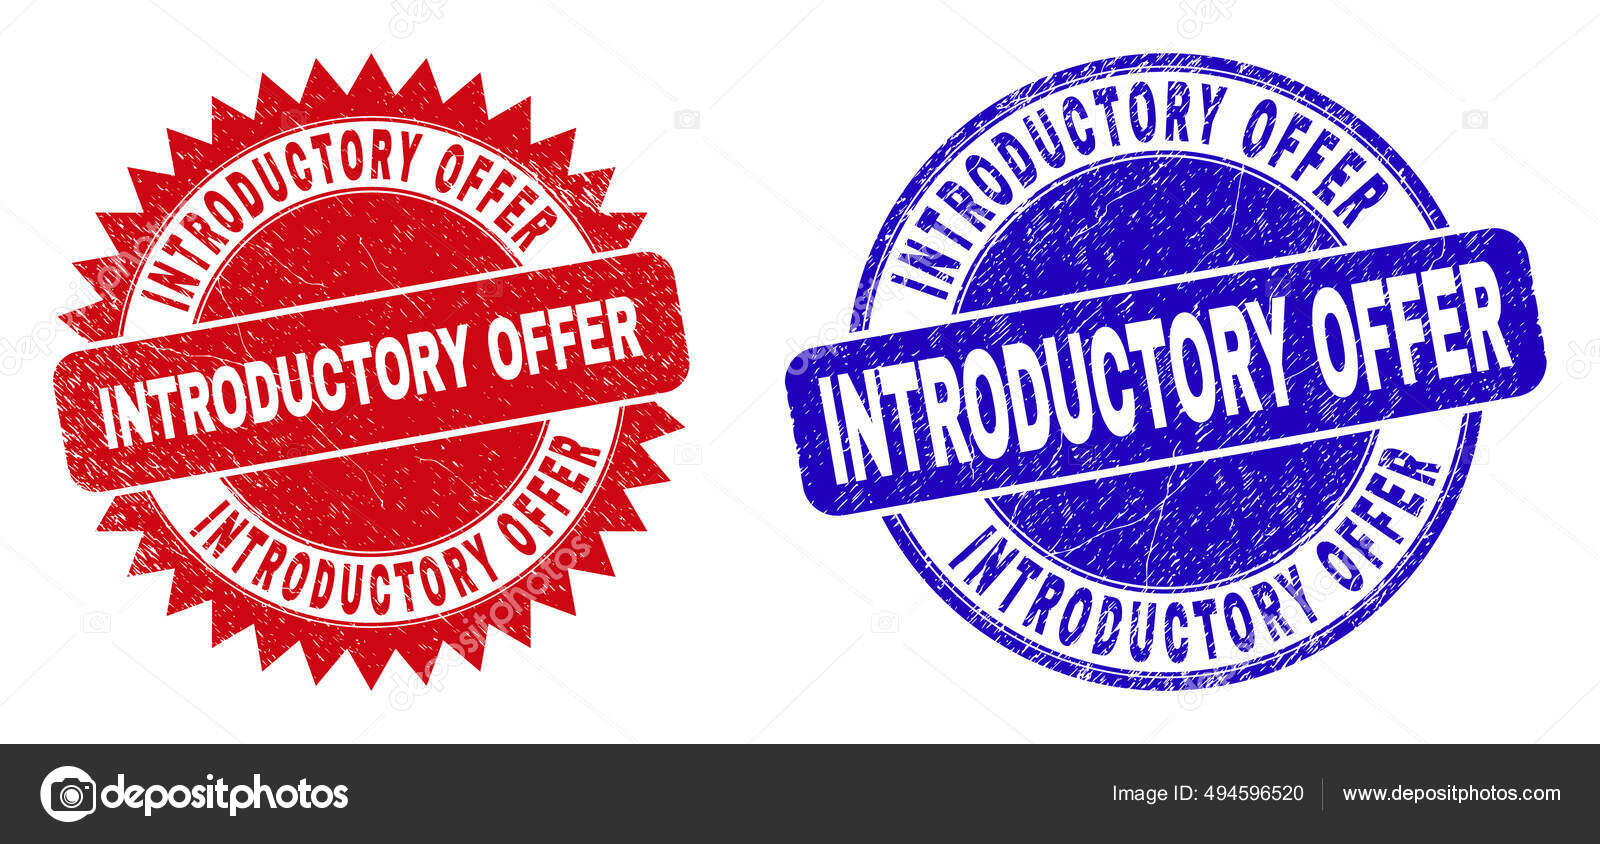 Free introductory offer